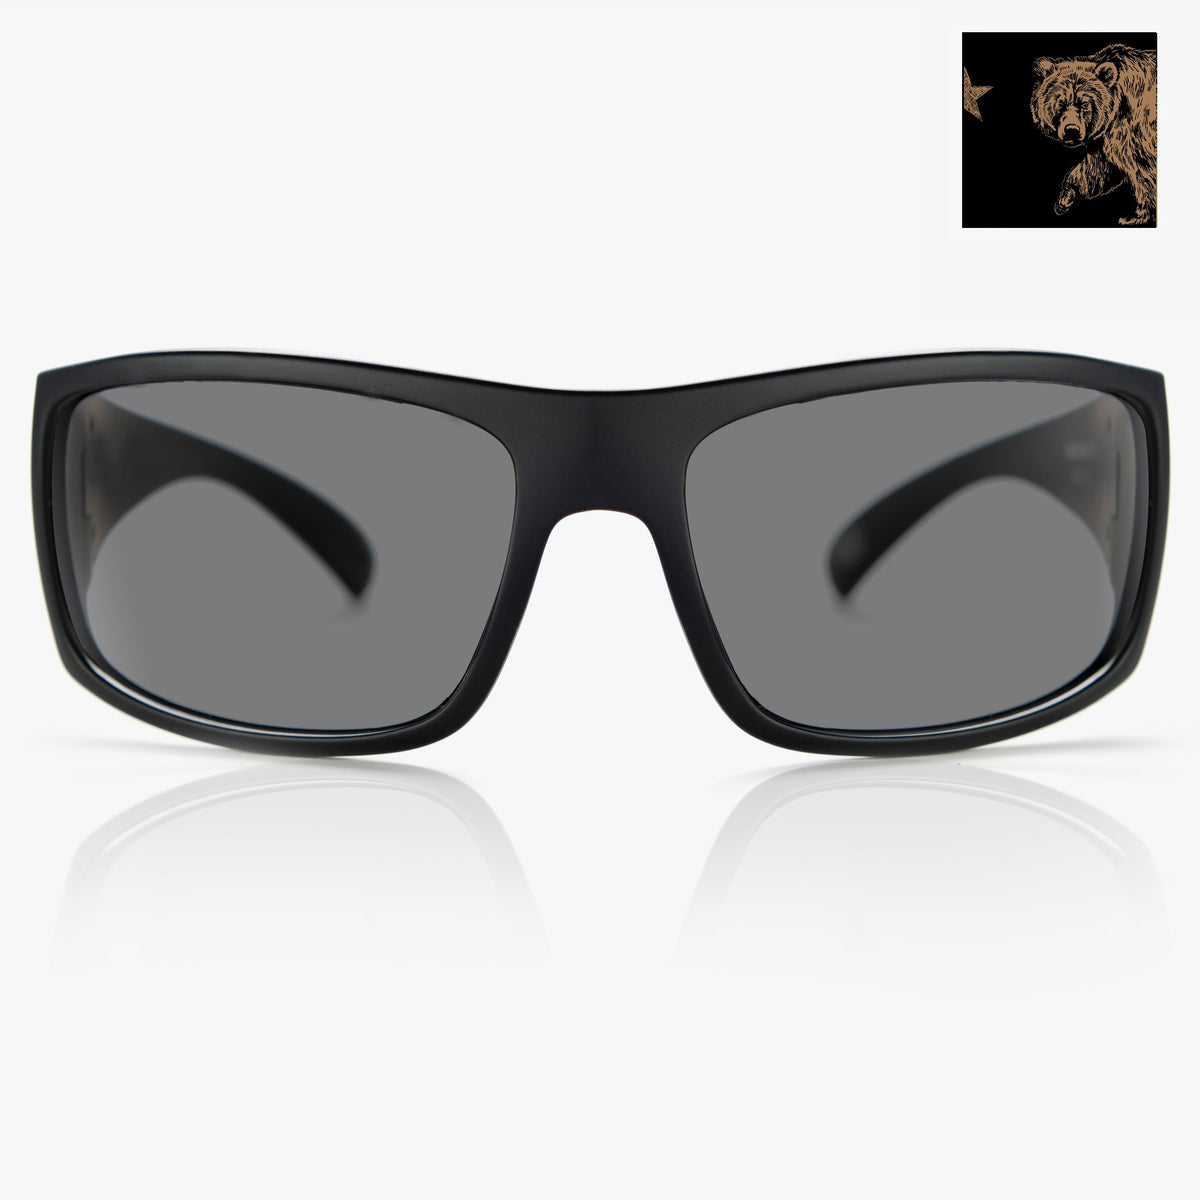 Magnate Polarized Sunglasses For Men Madson Of America Madson Of America